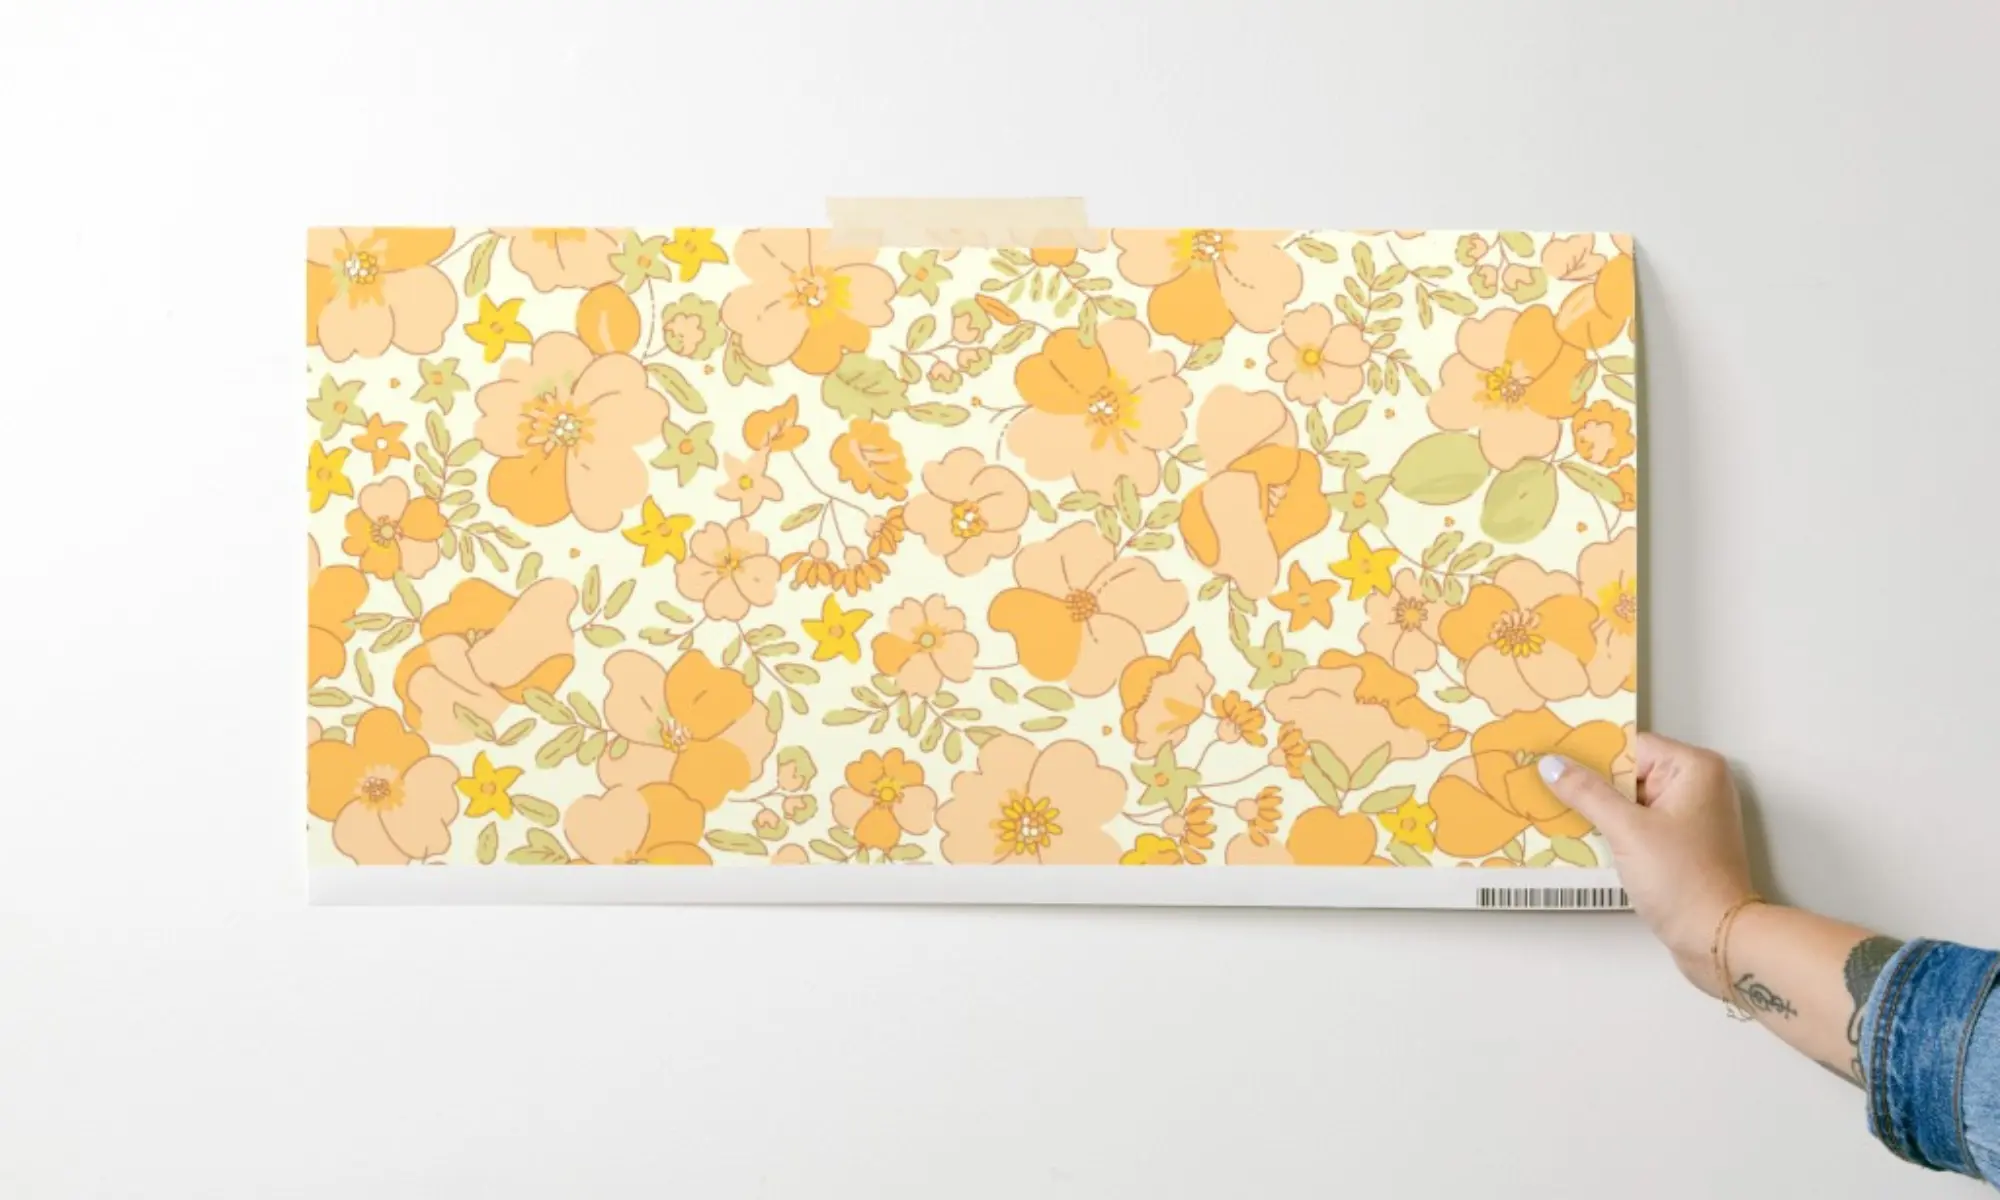 Swatch of wallpaper printed with lemon and bee design.